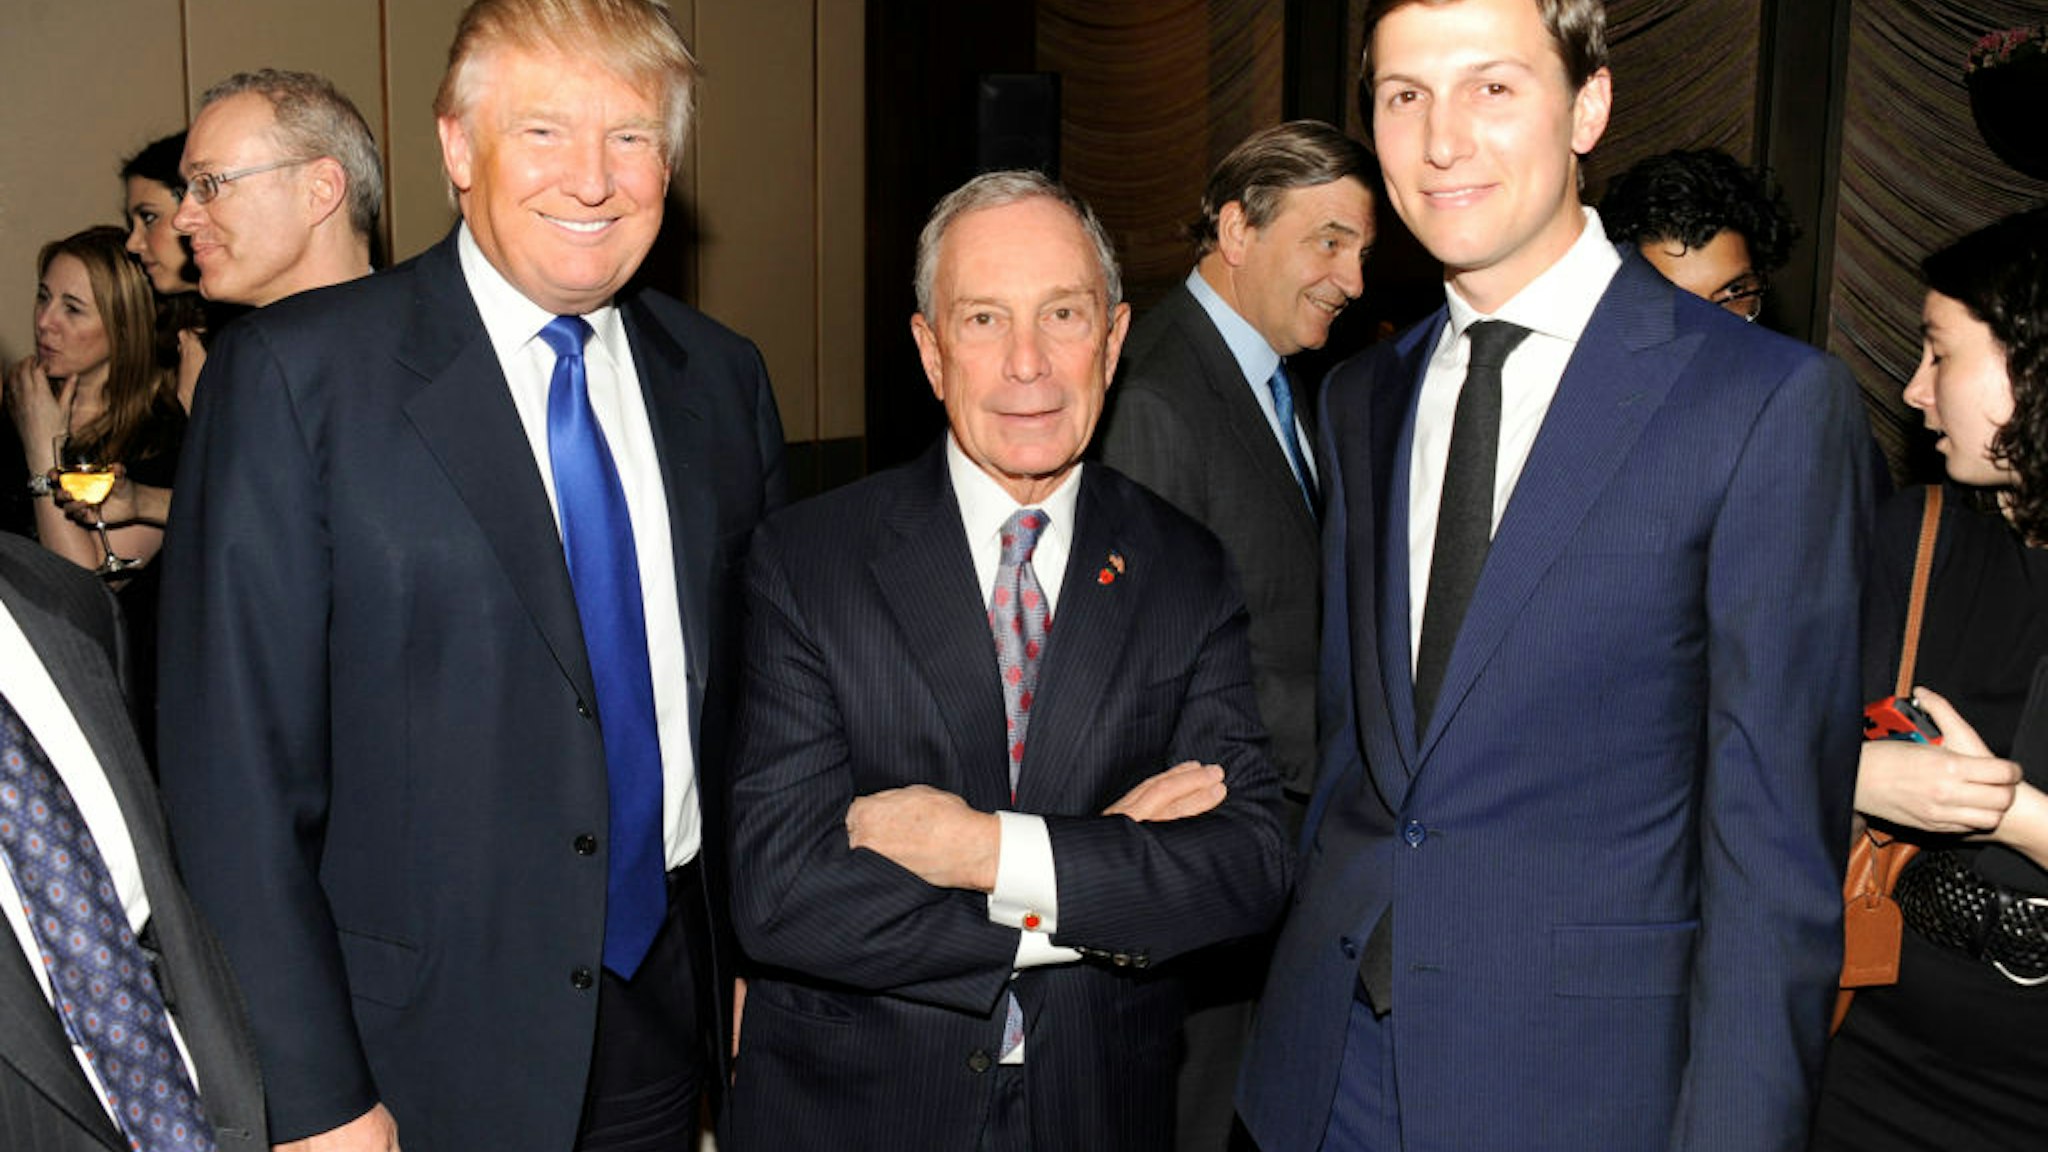 (L-R) Donald Trump, Mayor Michael Bloomberg and Jared Kushner attend The New York Observer 25th Anniversary at Four Seasons Restaurant on March 14, 2013 in New York City.